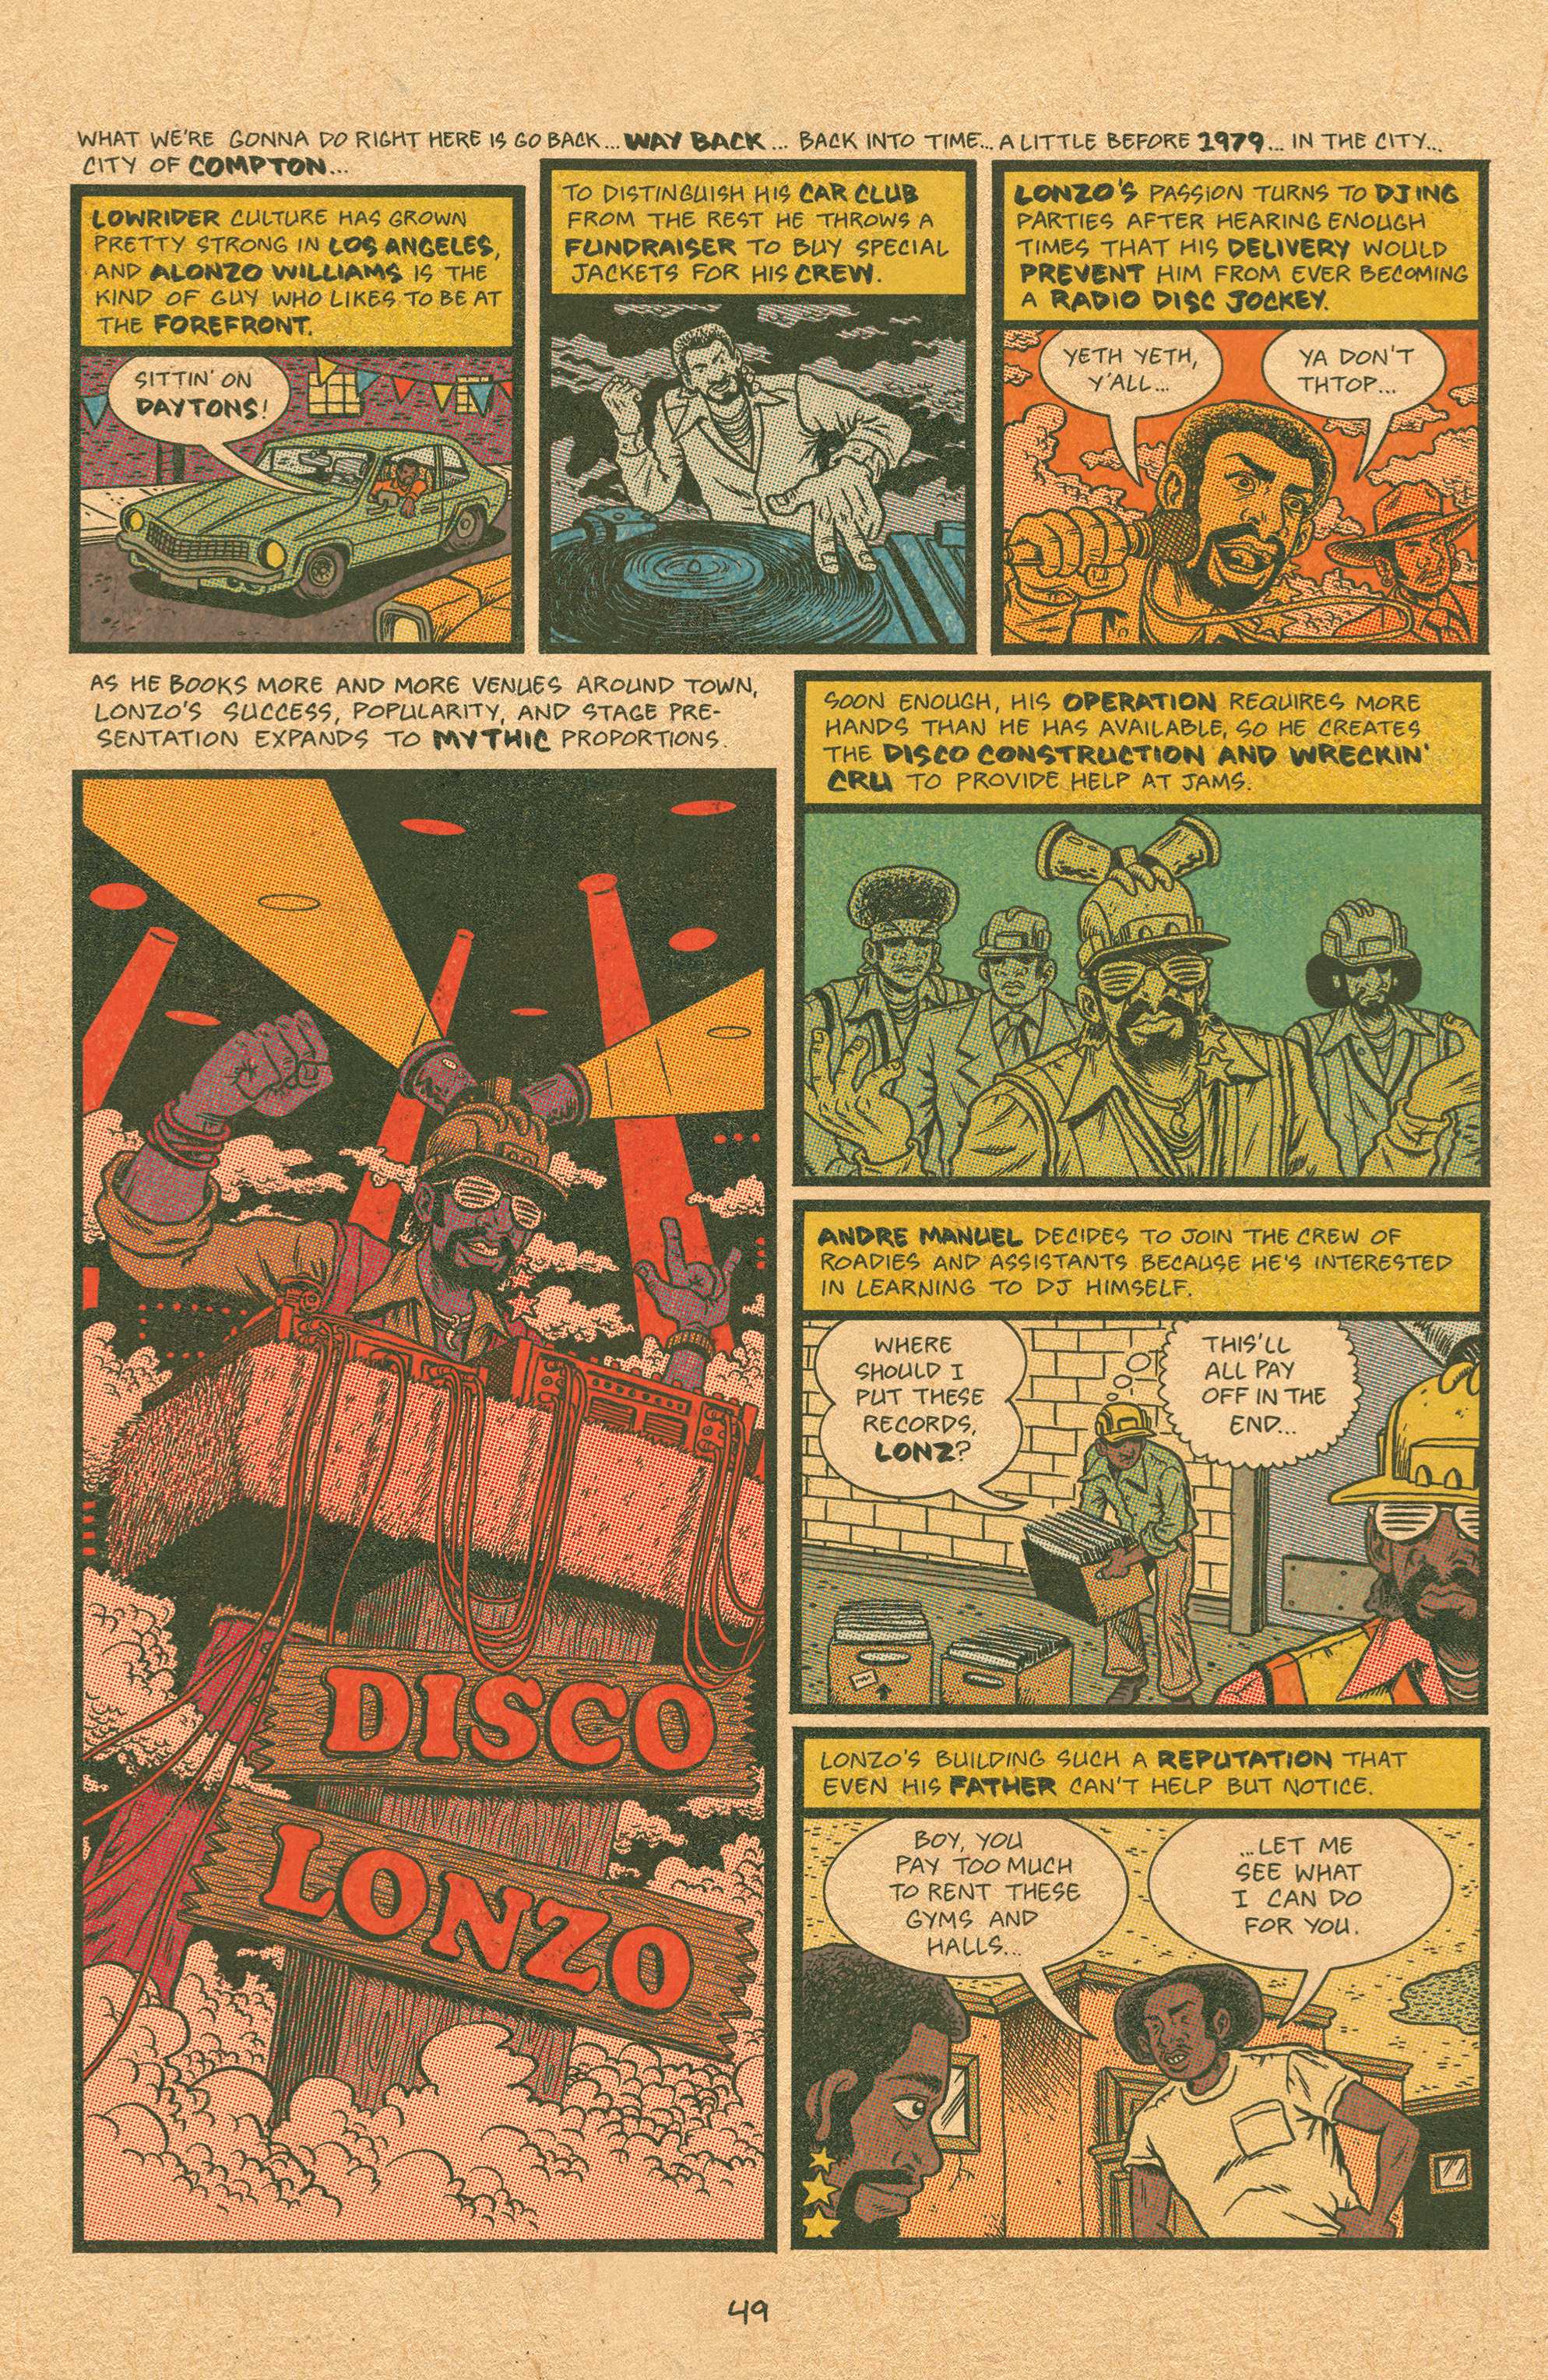 Read online Free Comic Book Day 2015 comic -  Issue # Hip Hop Family Tree Three-in-One - Featuring Cosplayers - 10